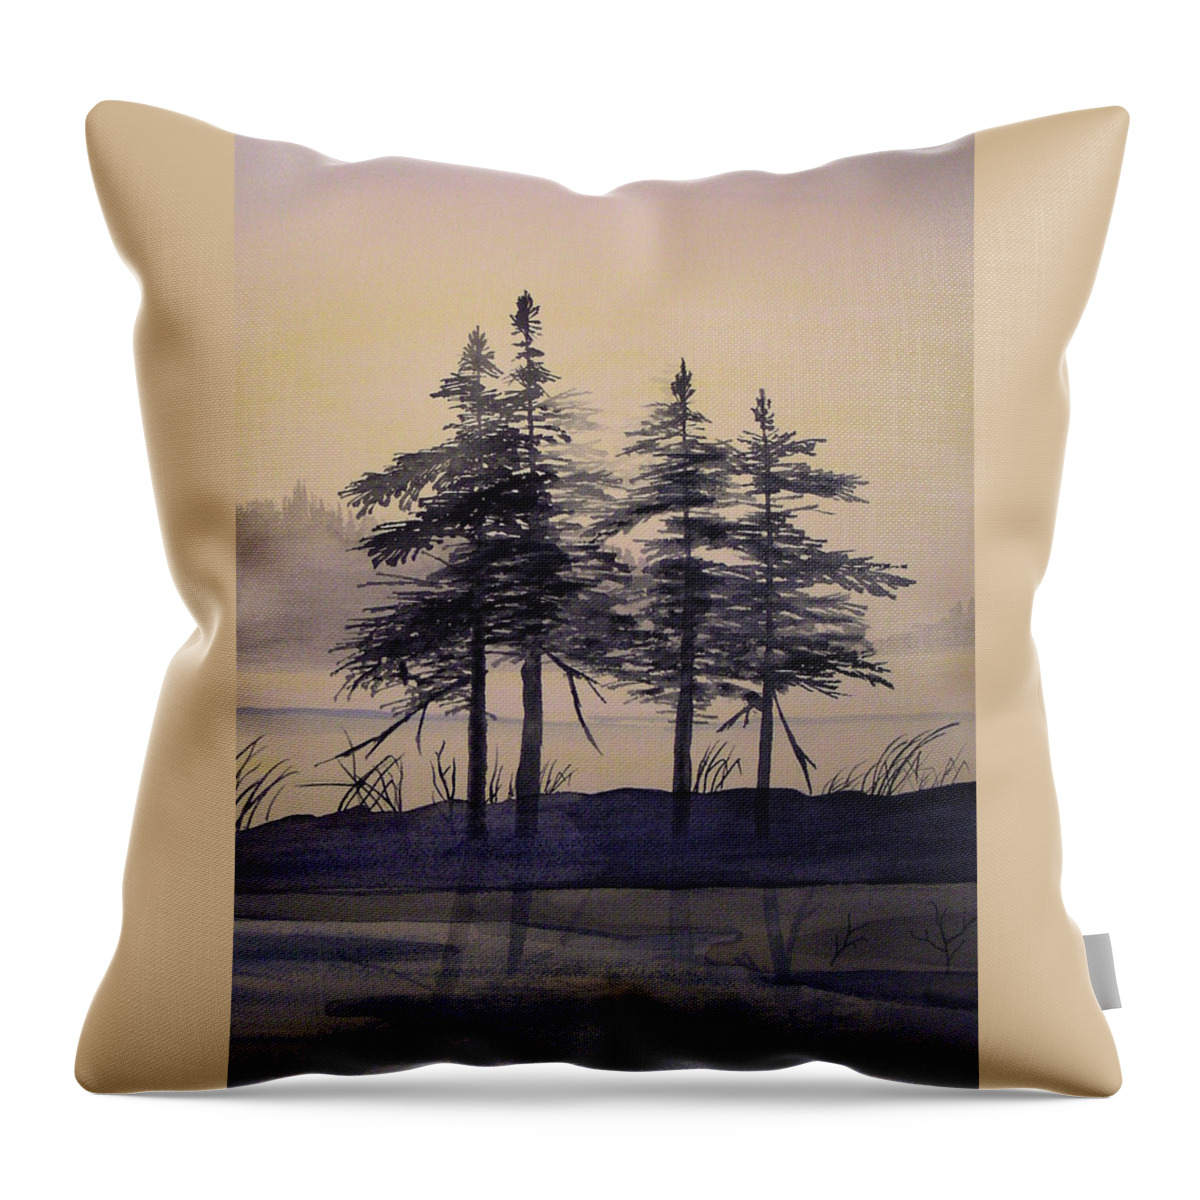 Sunrise Throw Pillow featuring the painting Aguasabon Trees by Gigi Dequanne